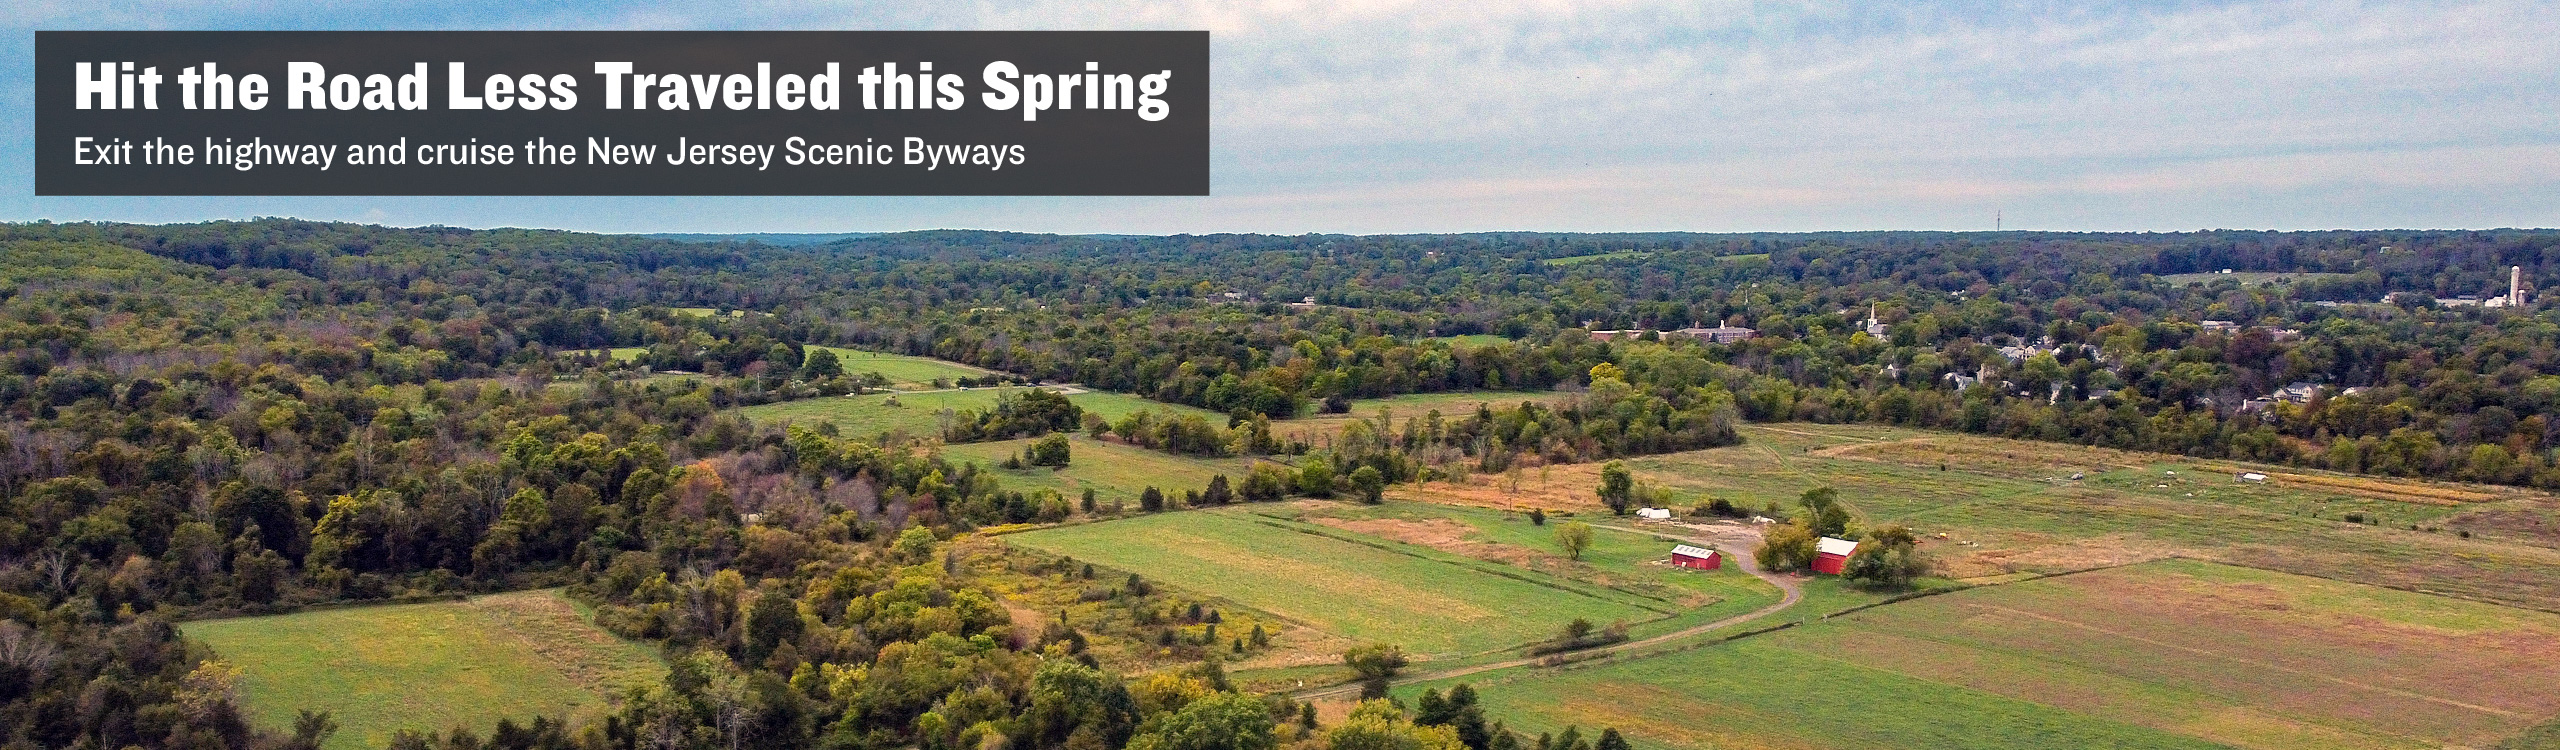 Image of farm land, photo text: Hit the Road Less Traveled this Spring, Exit the highway and cruise the New Jersey Scenic Byways